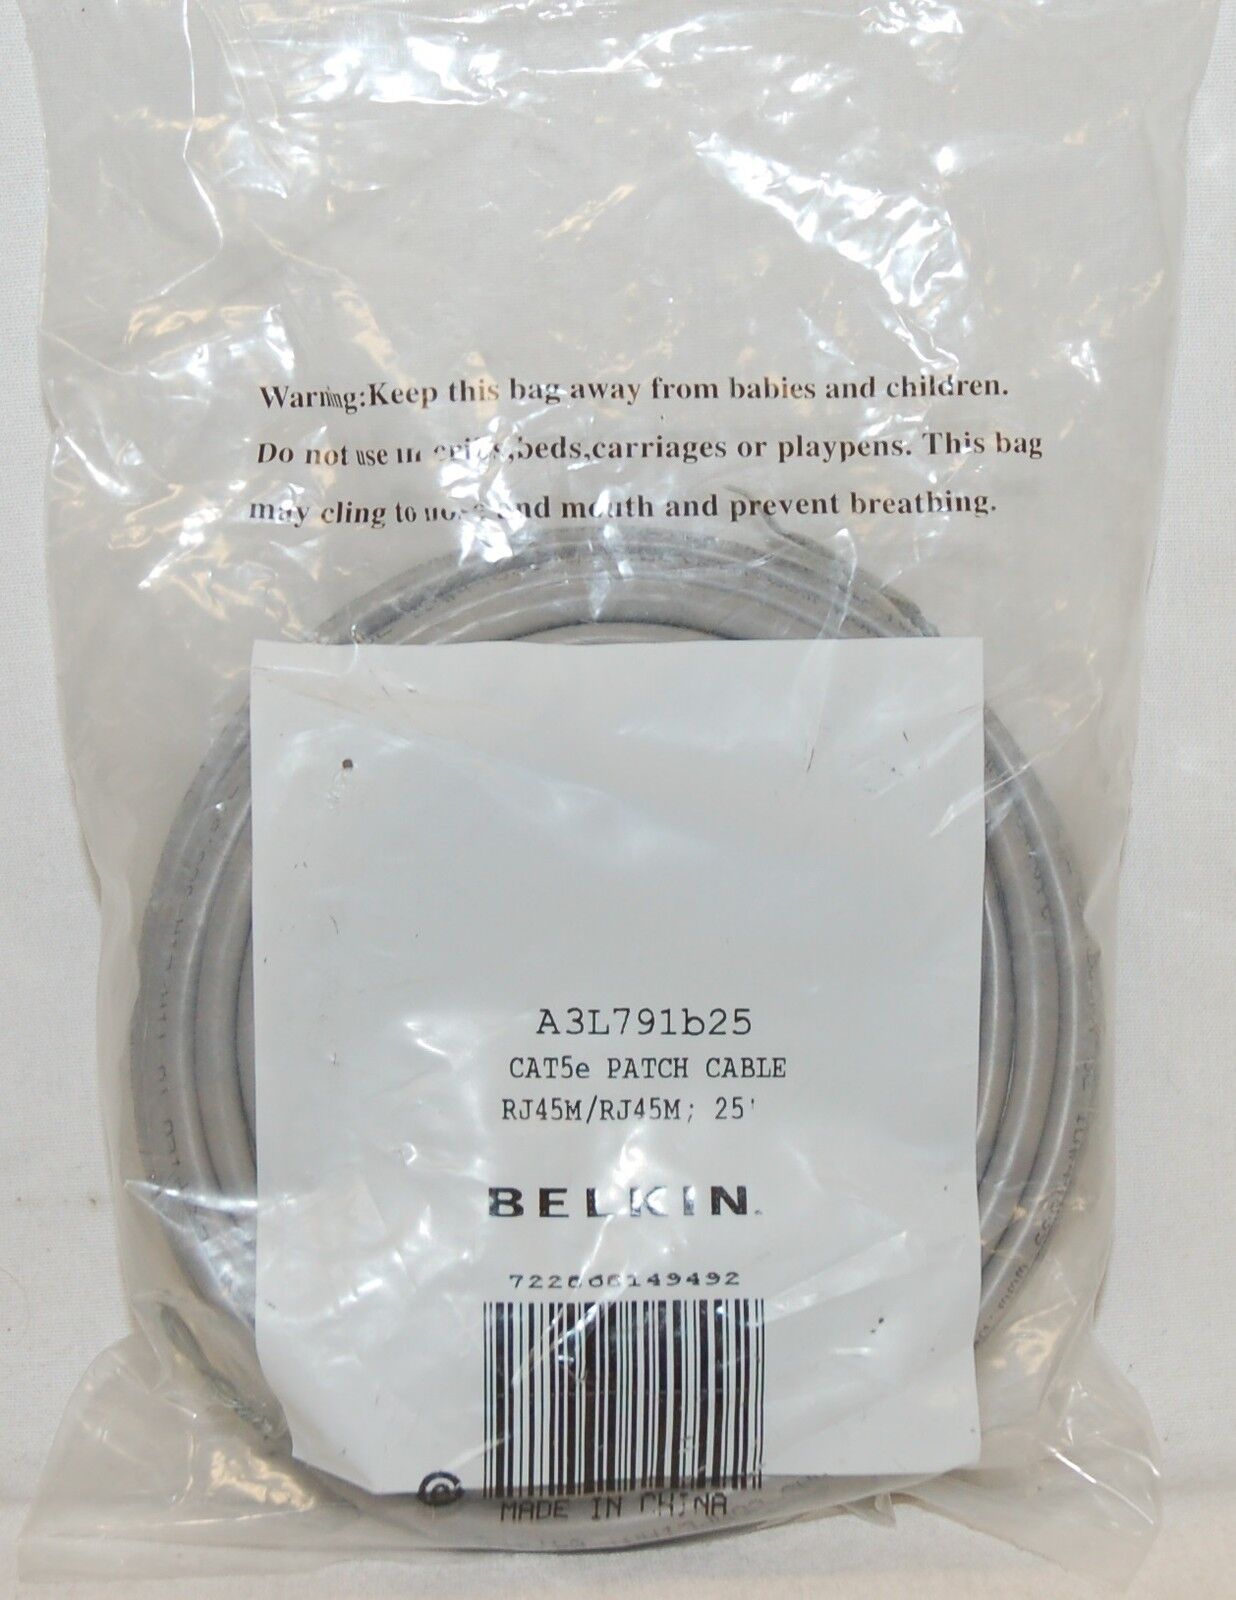 NEW Belkin A3L791B25 GRAY Cat5e Cabling 25' Length Home & Office Network RJ-45